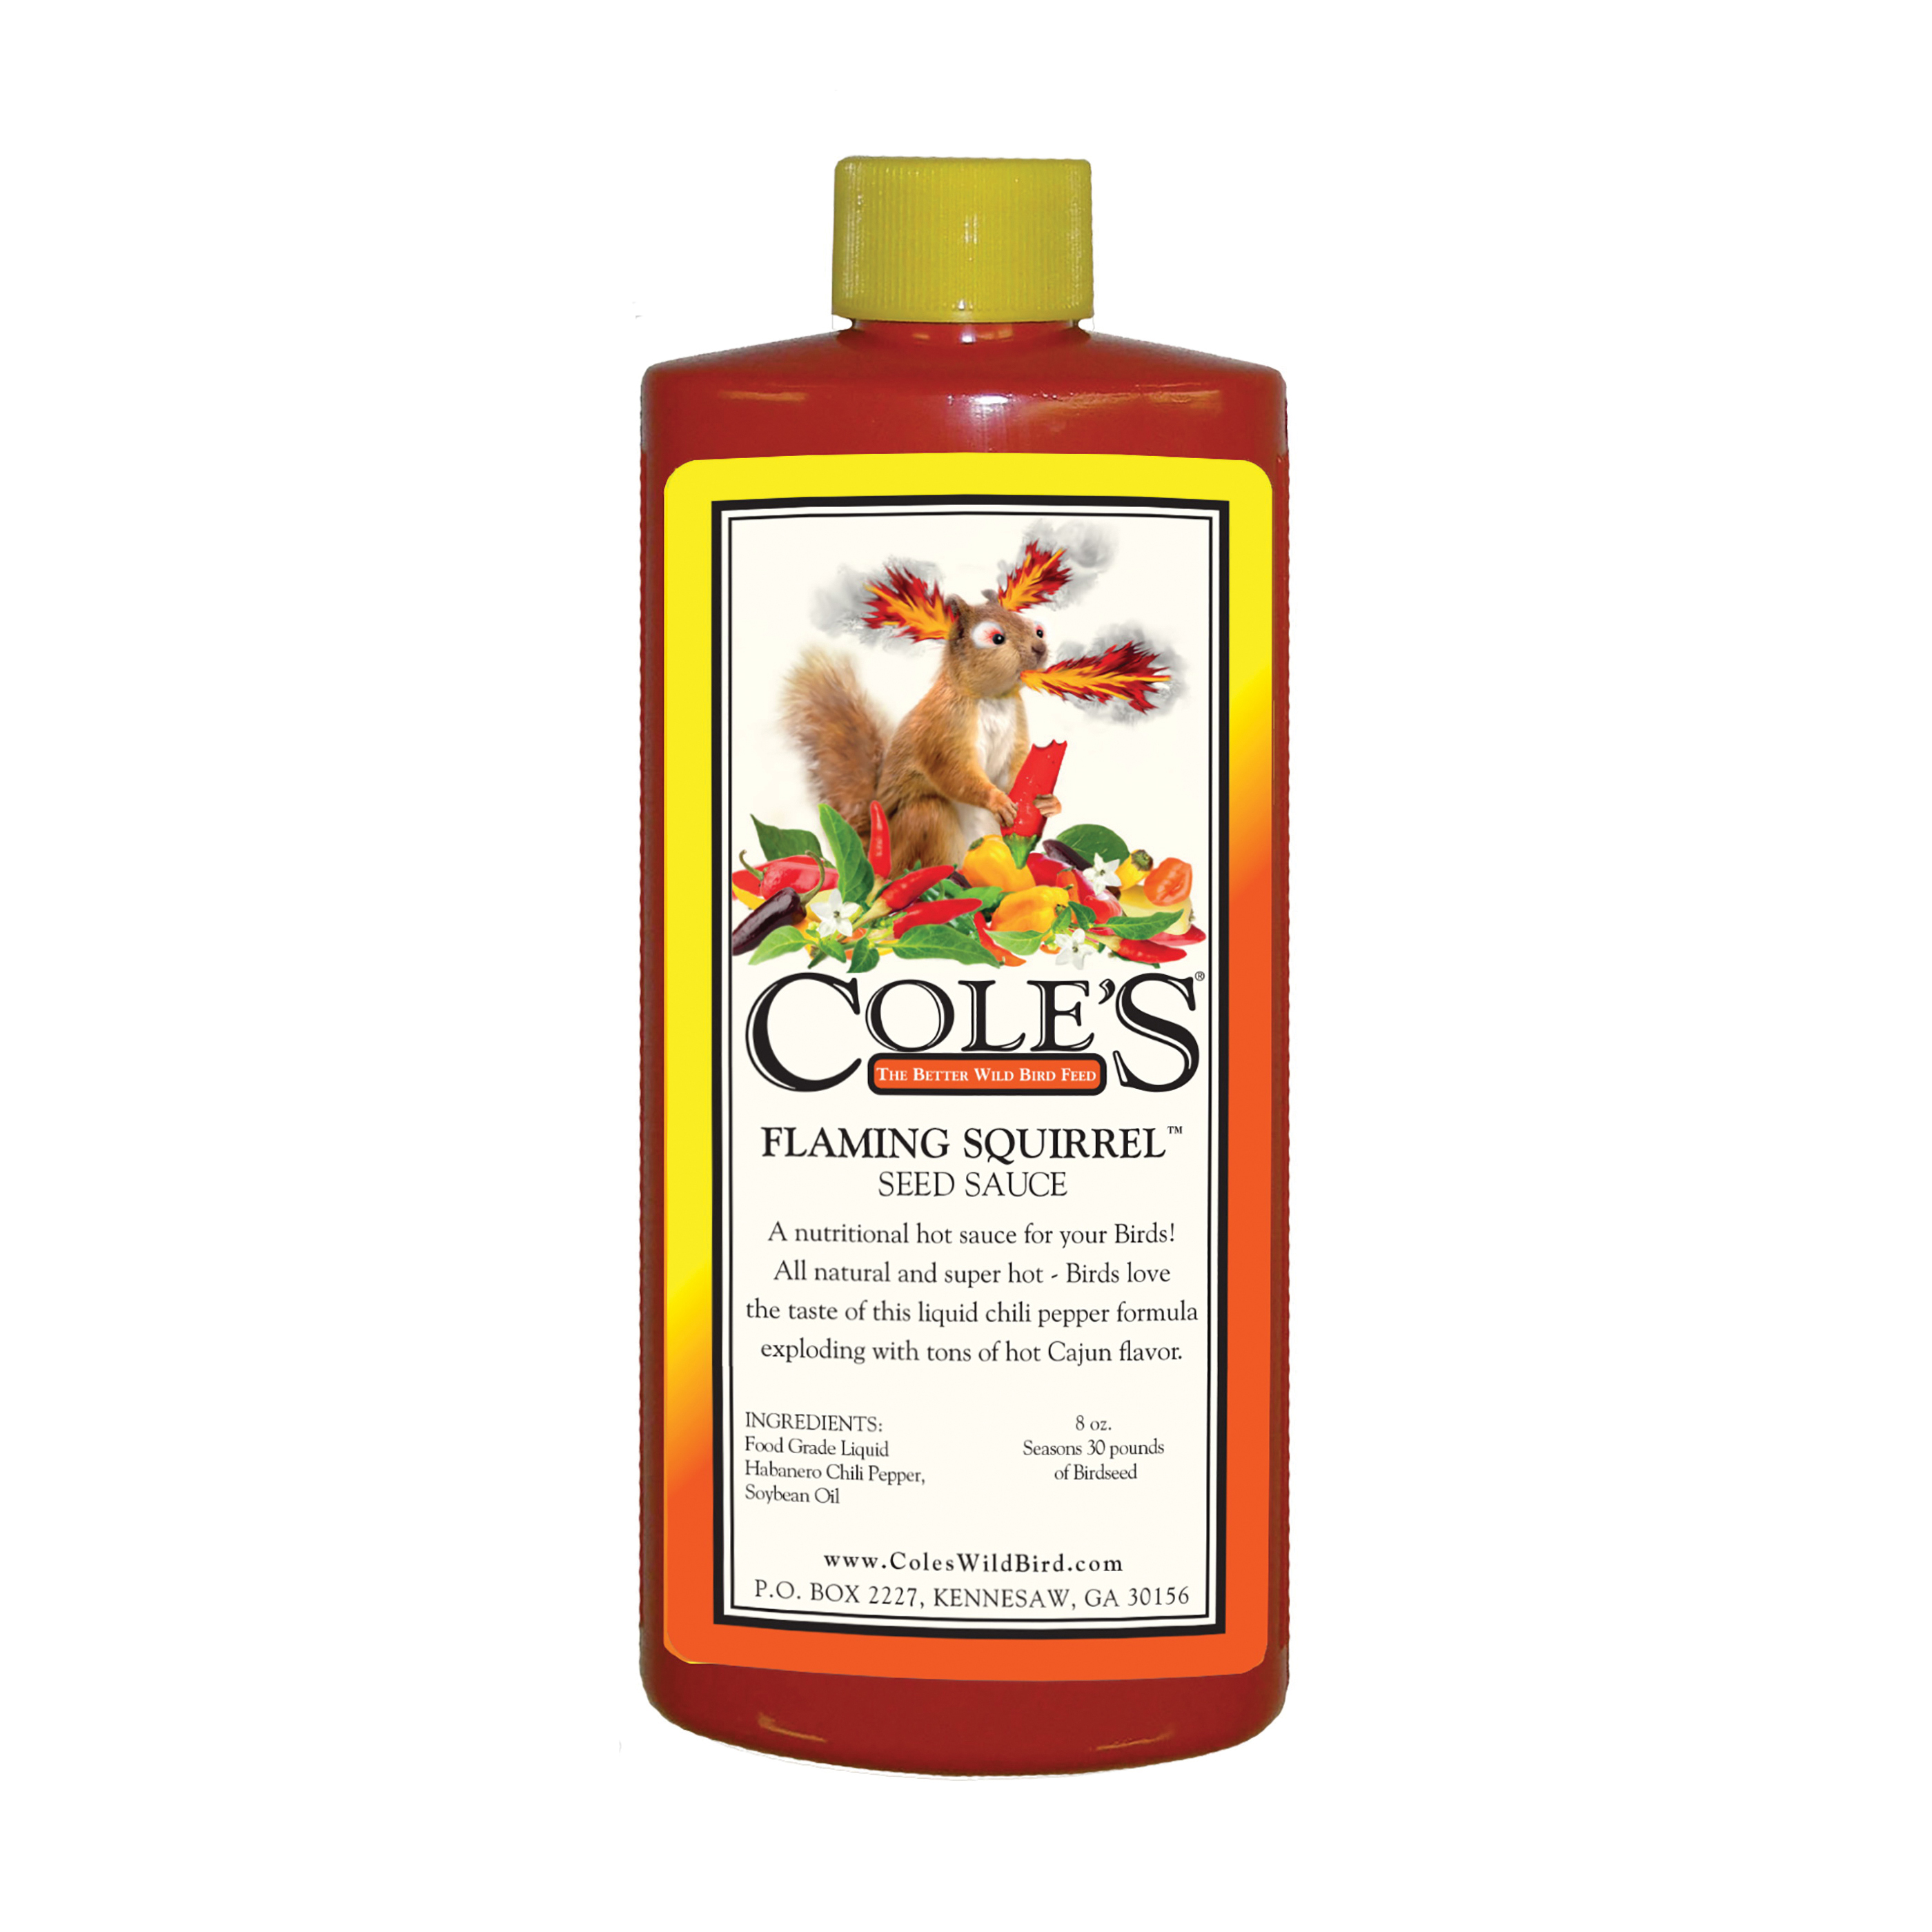 Cole's Flaming Squirrel Seed Sauce FS08 Bird Seed, Cajun Flavor, 8 oz Bottle